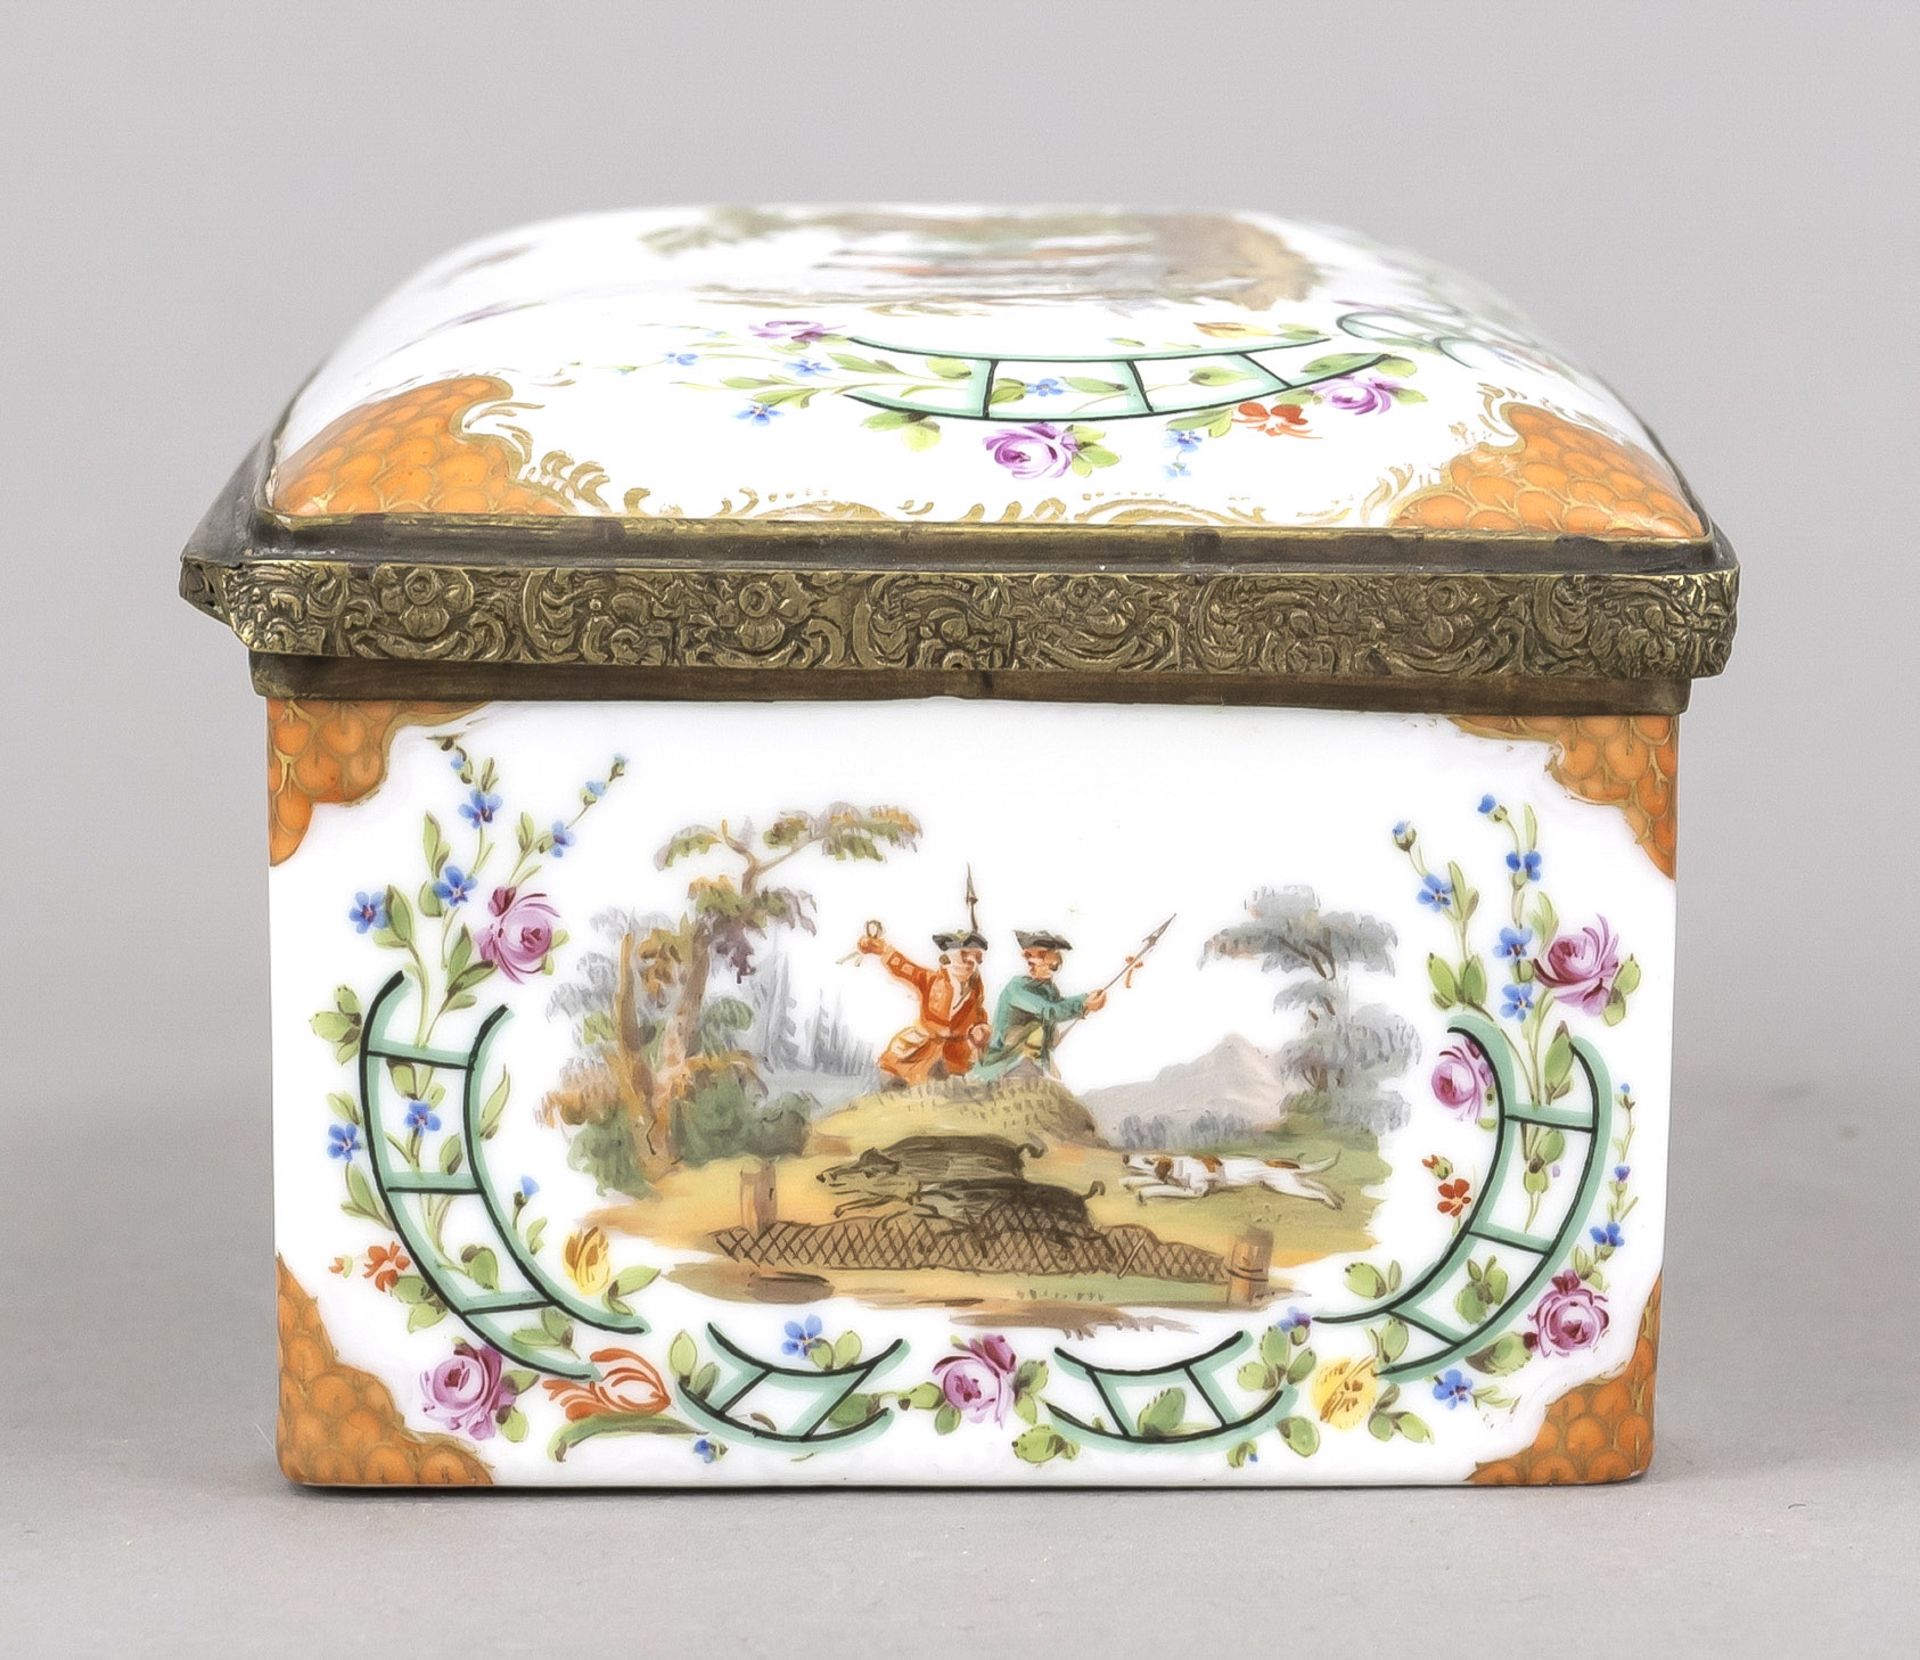 Lidded box in the style of 18th century KPM Berlin, unmarked, rectangular form with hinged, slightly - Image 4 of 7